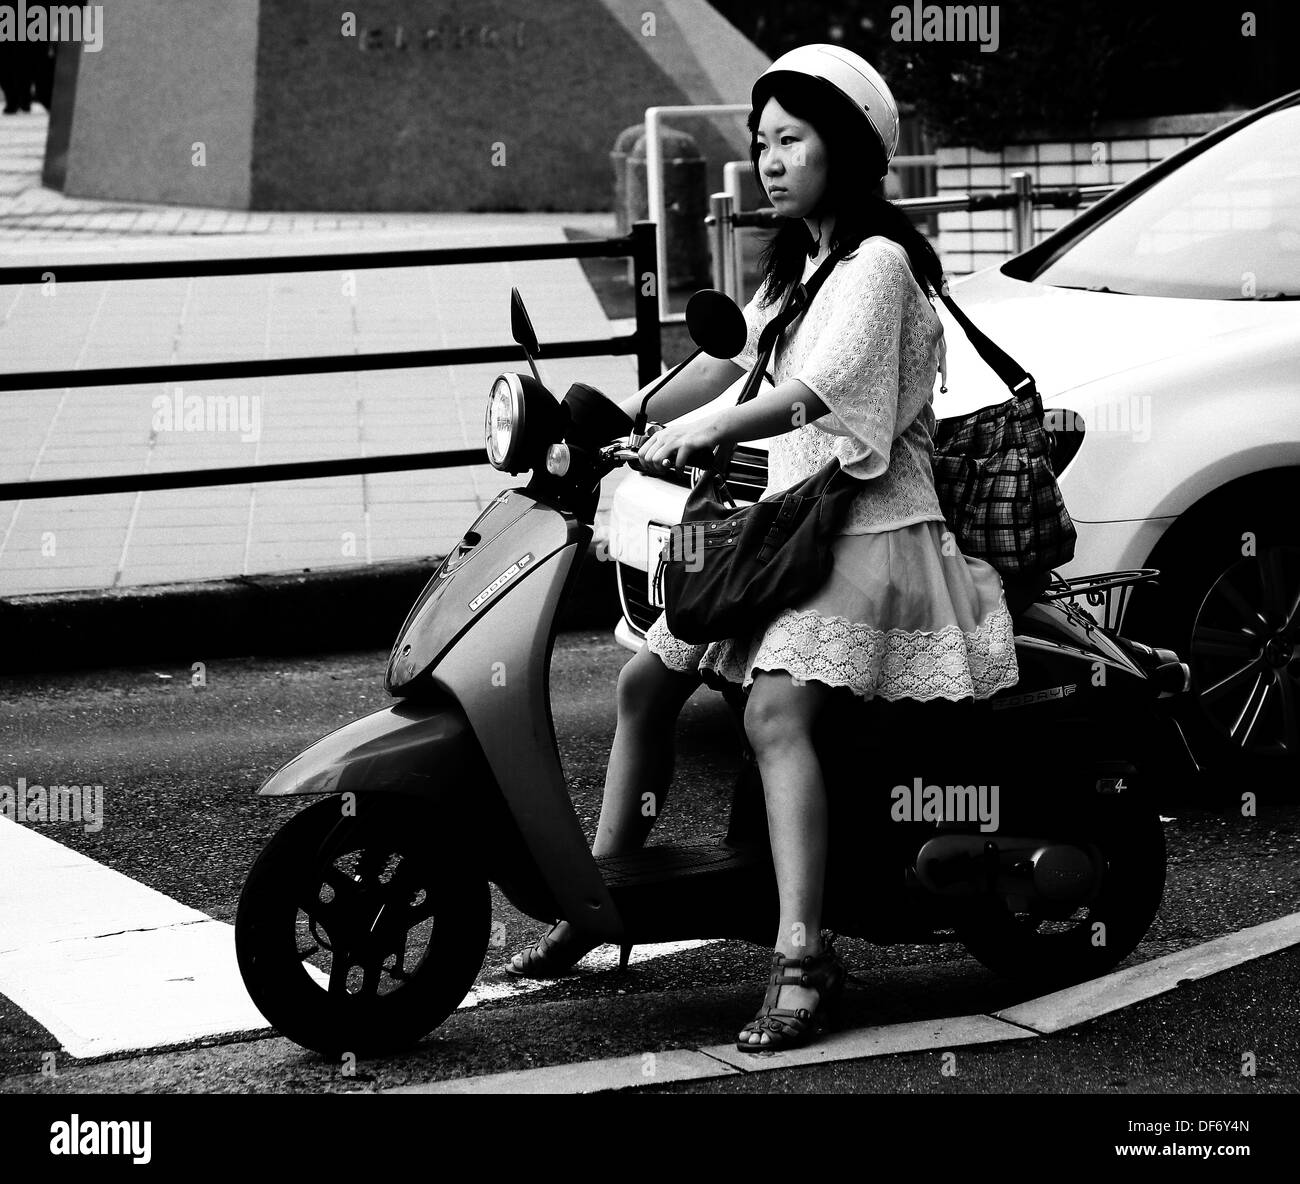 Japanese girl on scooter Stock Photo